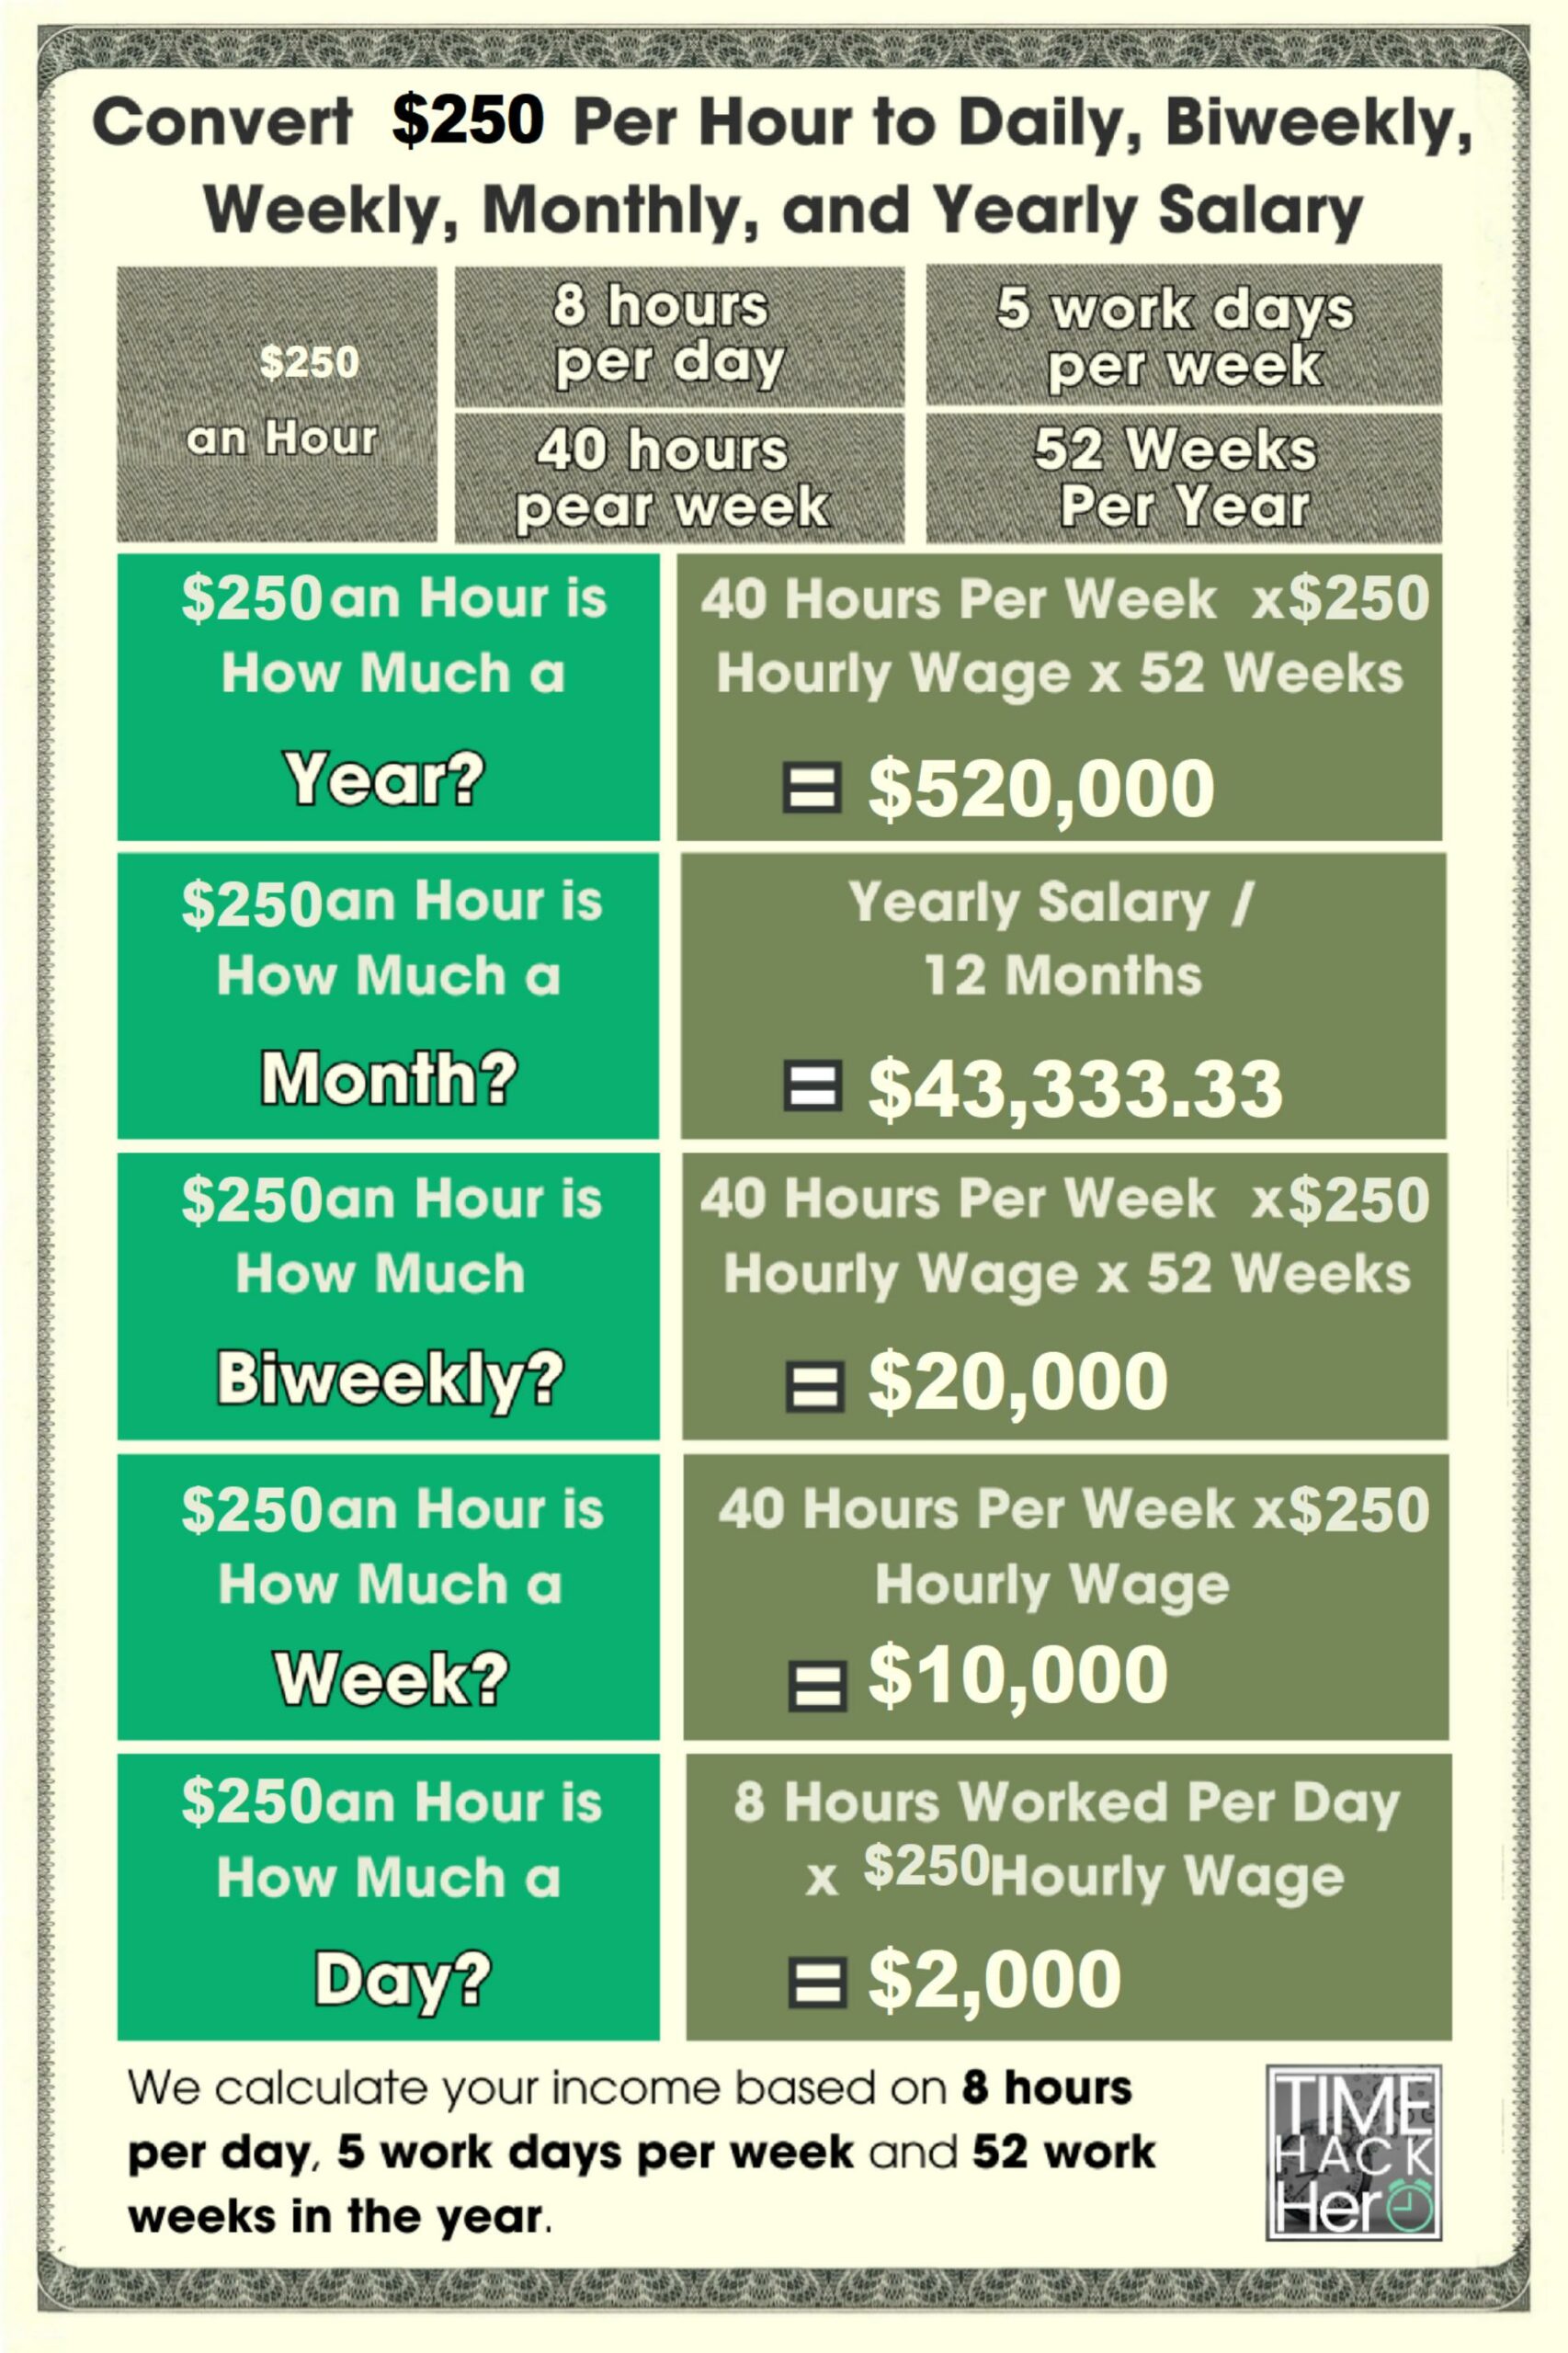 Convert $250 Per Hour to Weekly, Monthly, and Yearly Salary